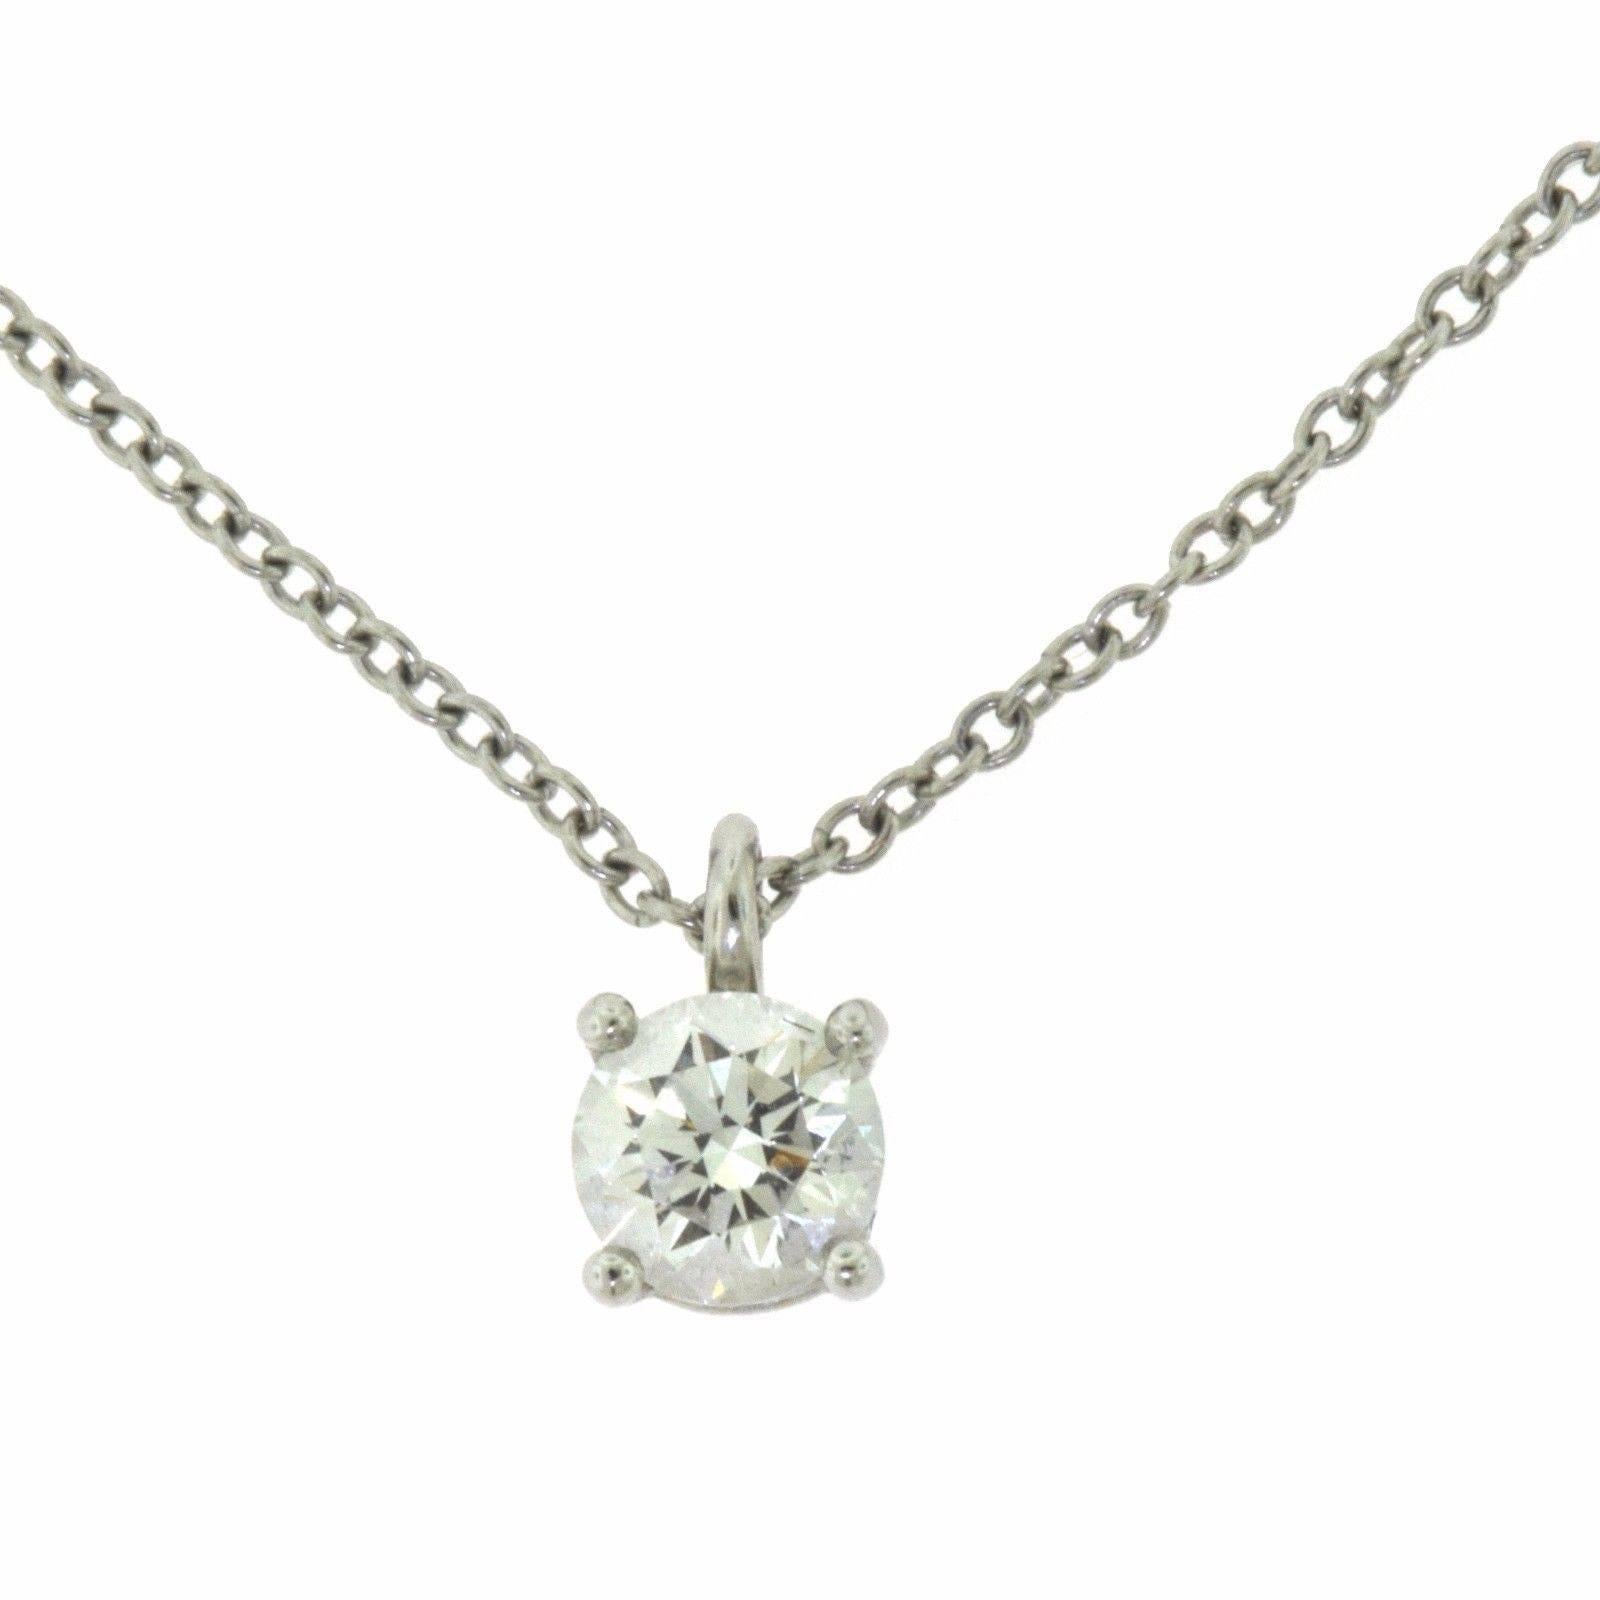 Magnificent everyday pendant by Tiffany & Co. in platinum with a round brilliant diamond.

Designer: Tiffany & Co. 
Collection: Solitaire
Metal: Platinum
Stones: 1 Round Brilliant Cut Diamond
Diamond Color: E
Diamond Clarity: VVS1
Diamond